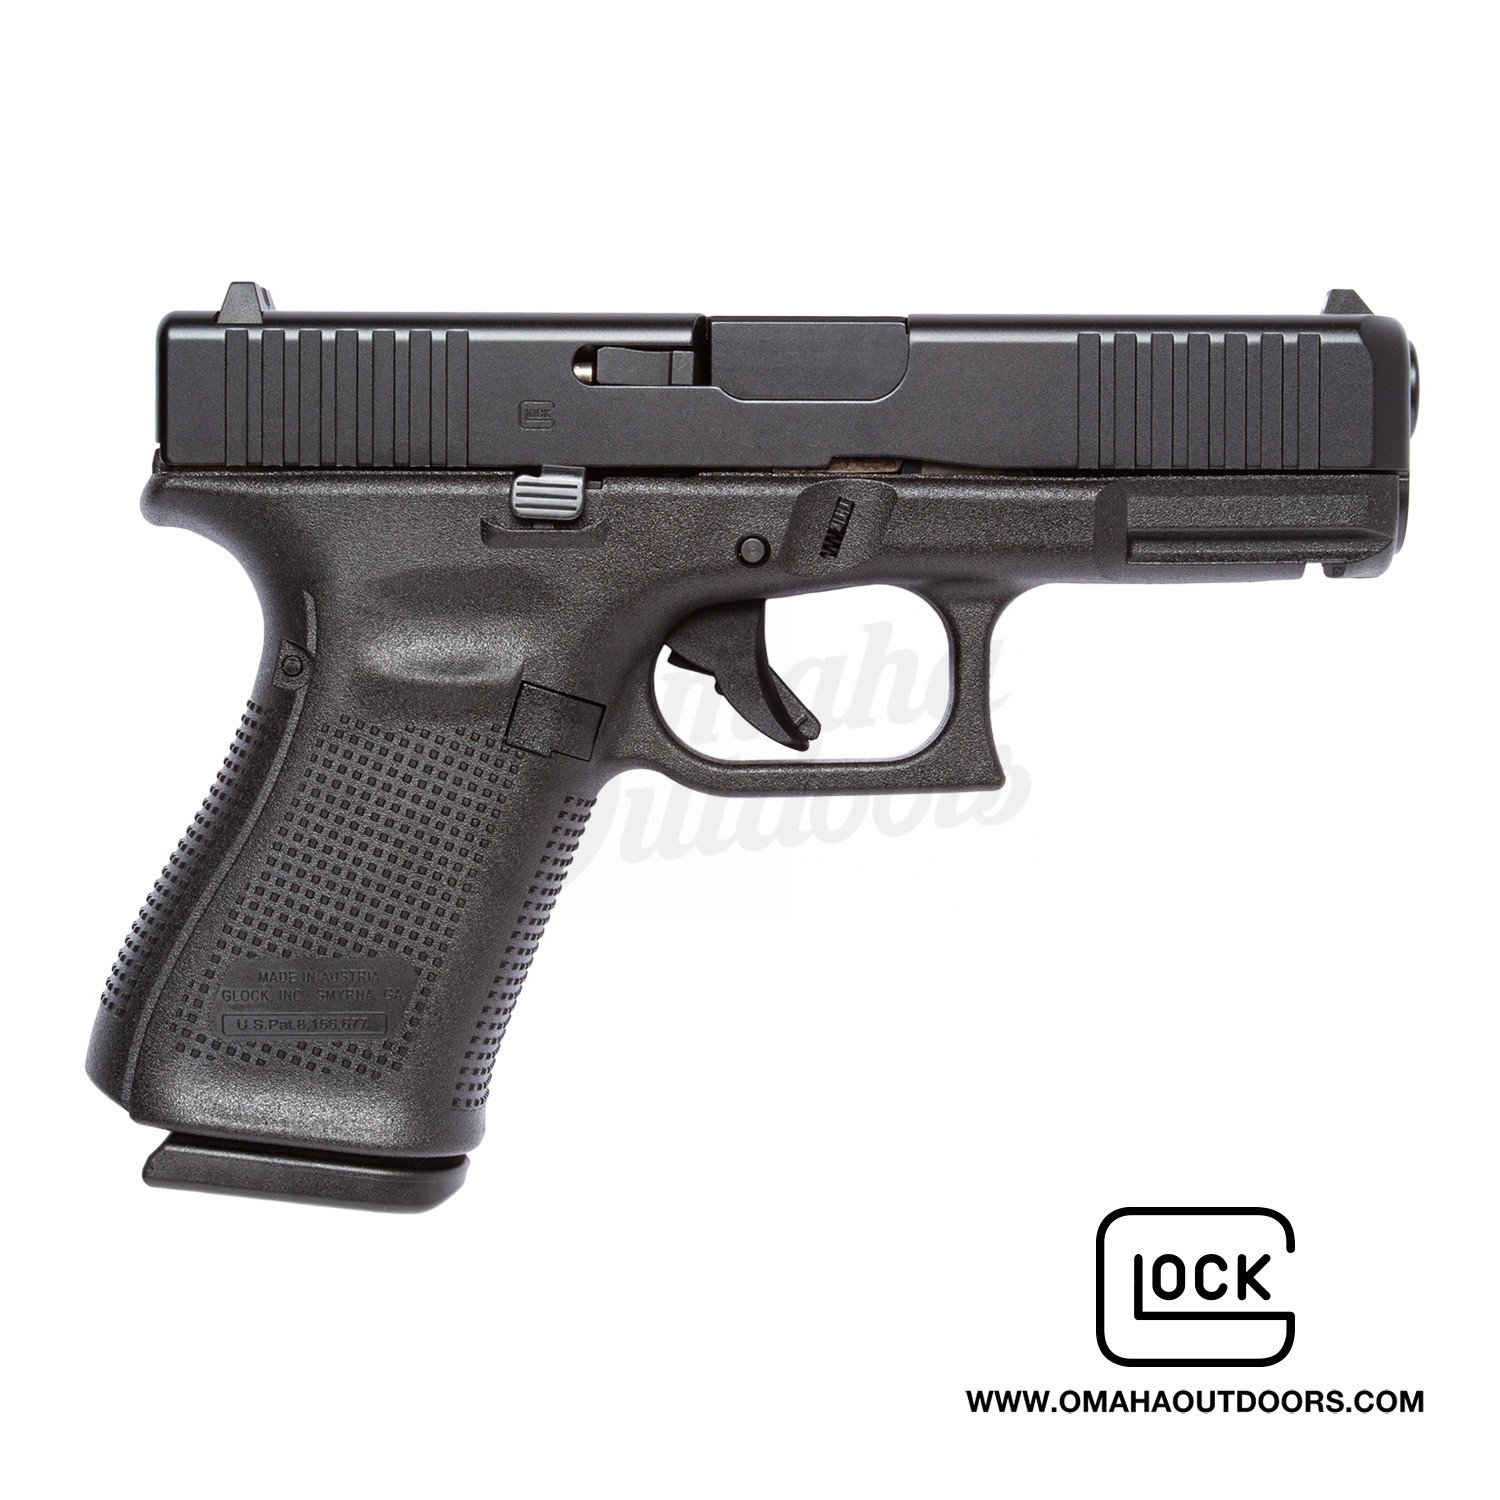 GLOCK 19 gen 3 9mm, Austria made. 2x 15 OR 10 round mags. CA Compliant.  Free shipping